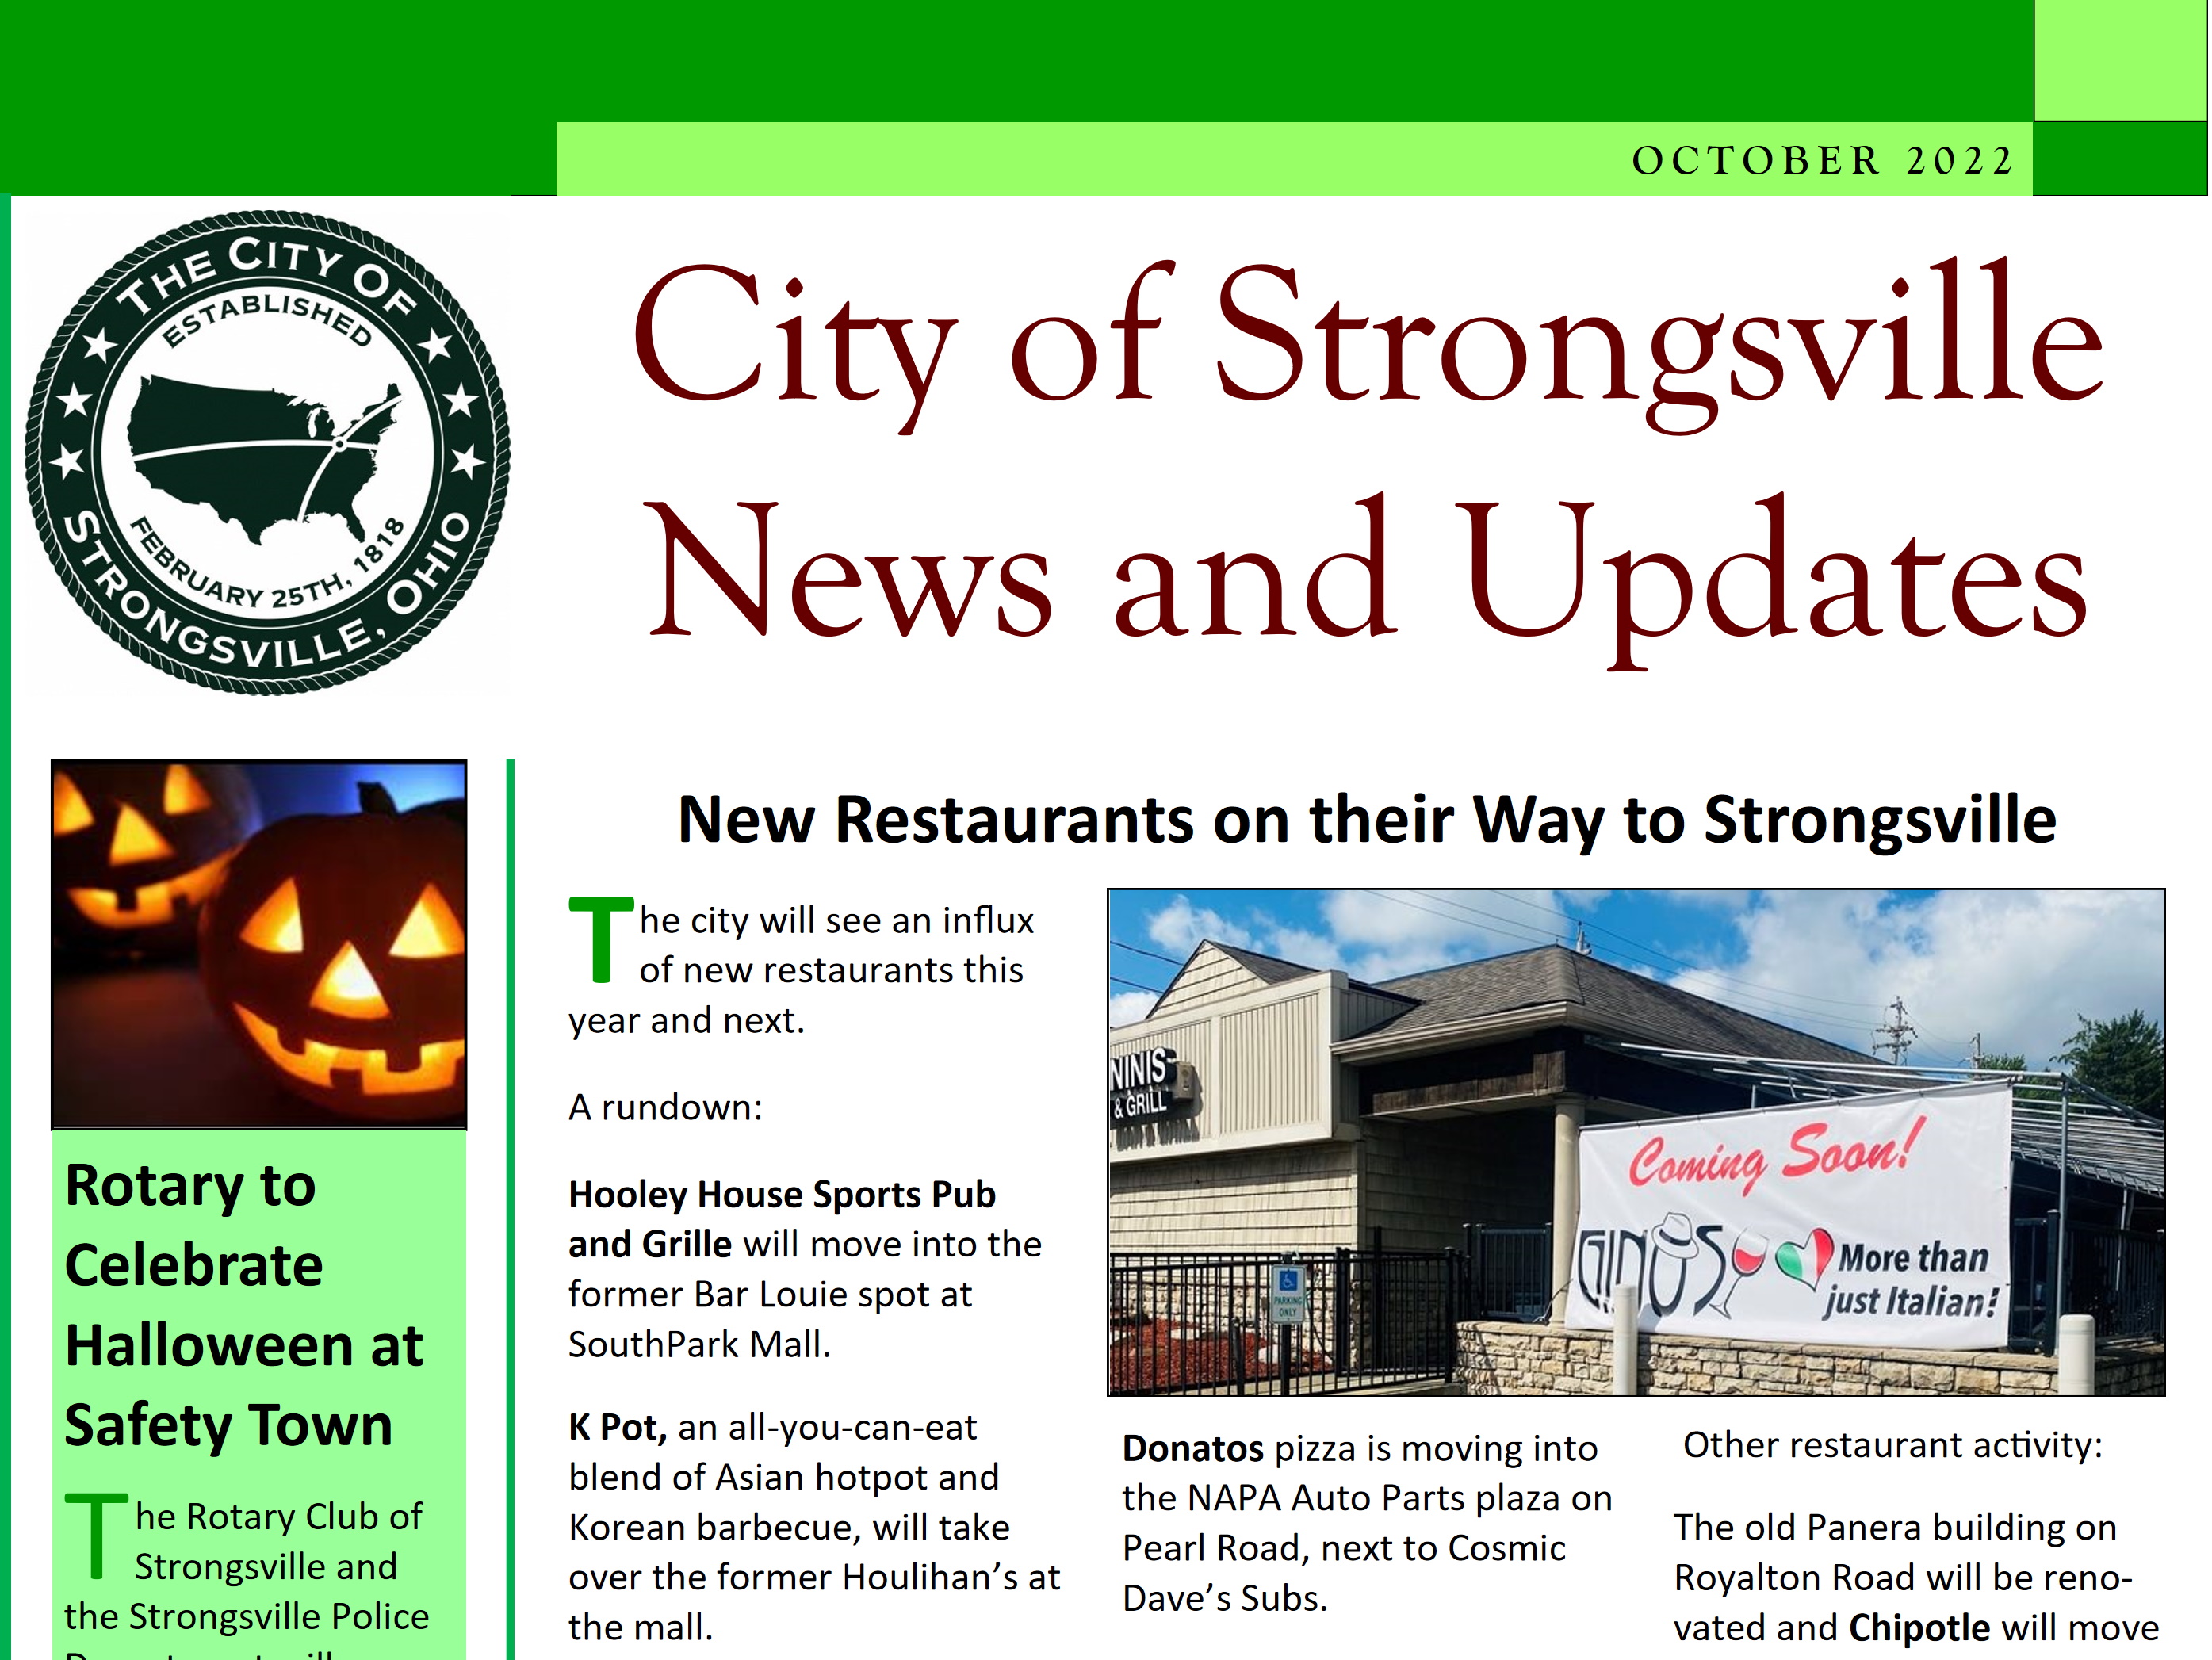 October Newsletter is Now Available